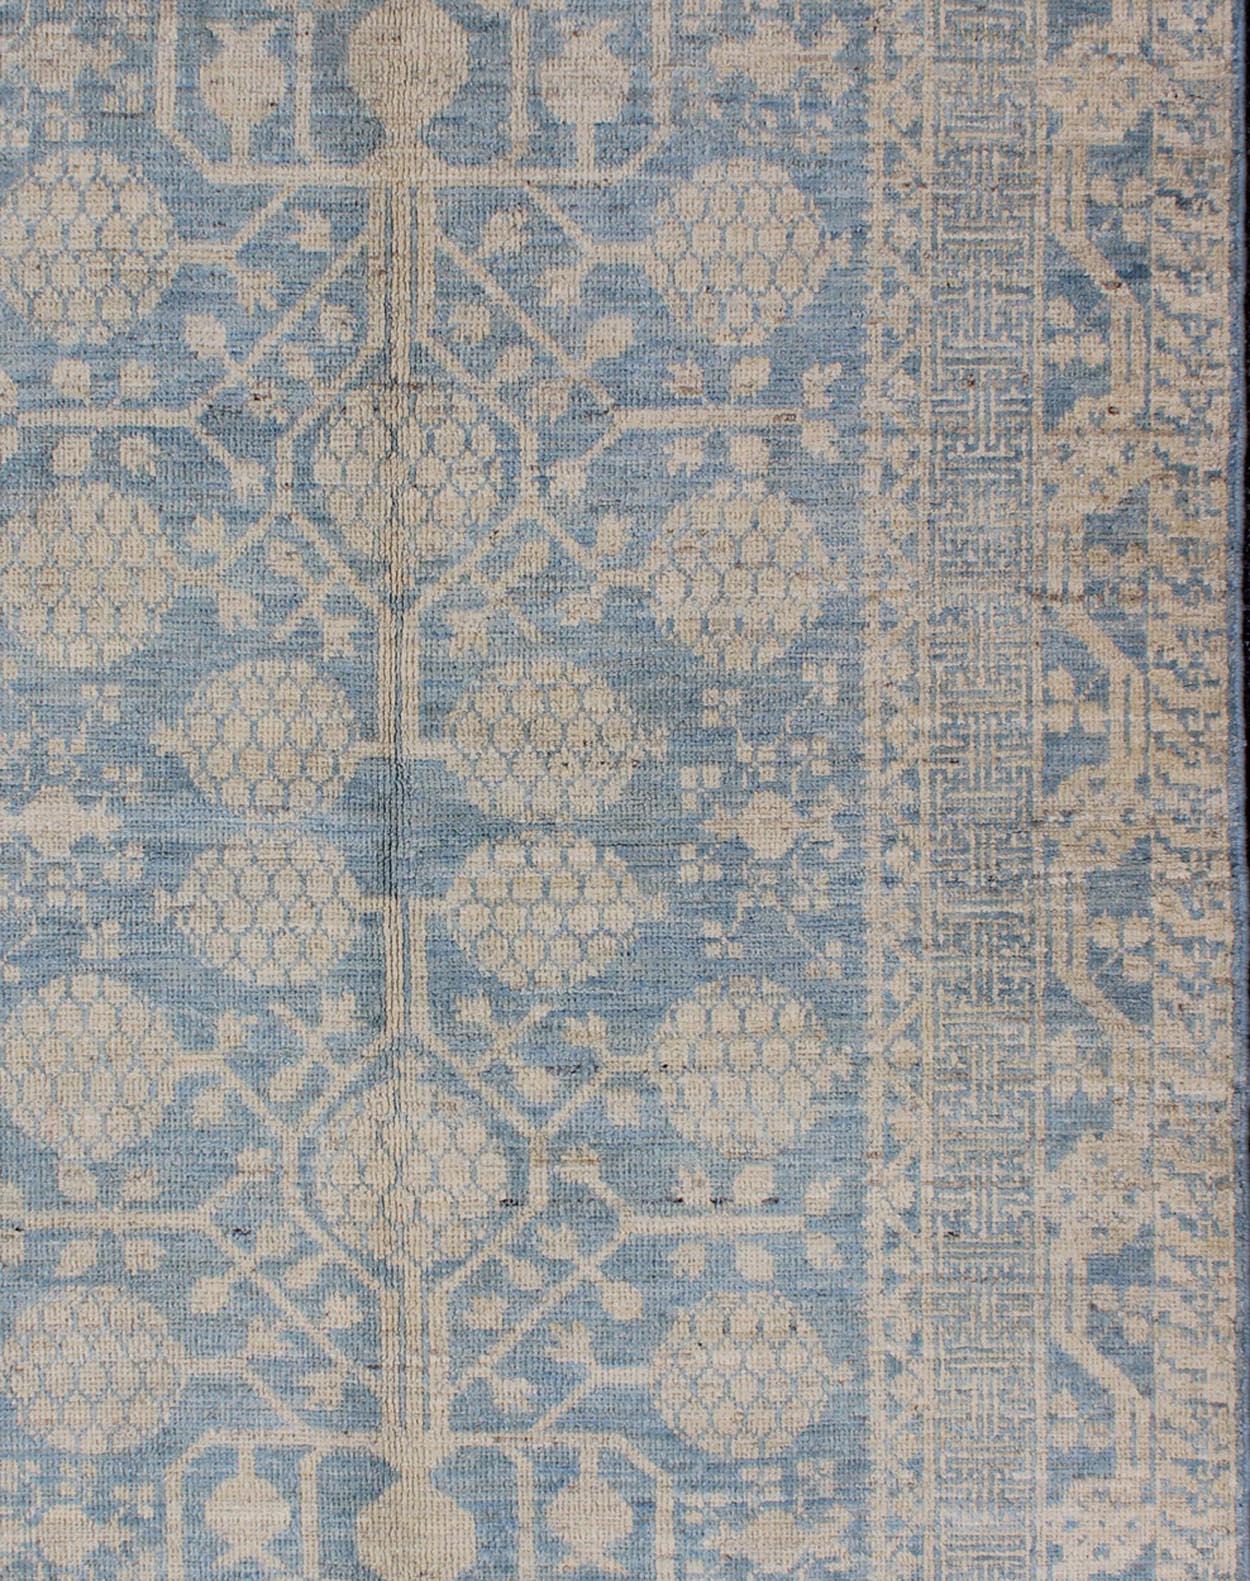 This Khotan features an all over Pomegranate Design flanked by a repeating pattern in the border. The entirety of the piece is rendered in light blue, and creams which makes it a versatile rug, well-suited for a variety of interiors including